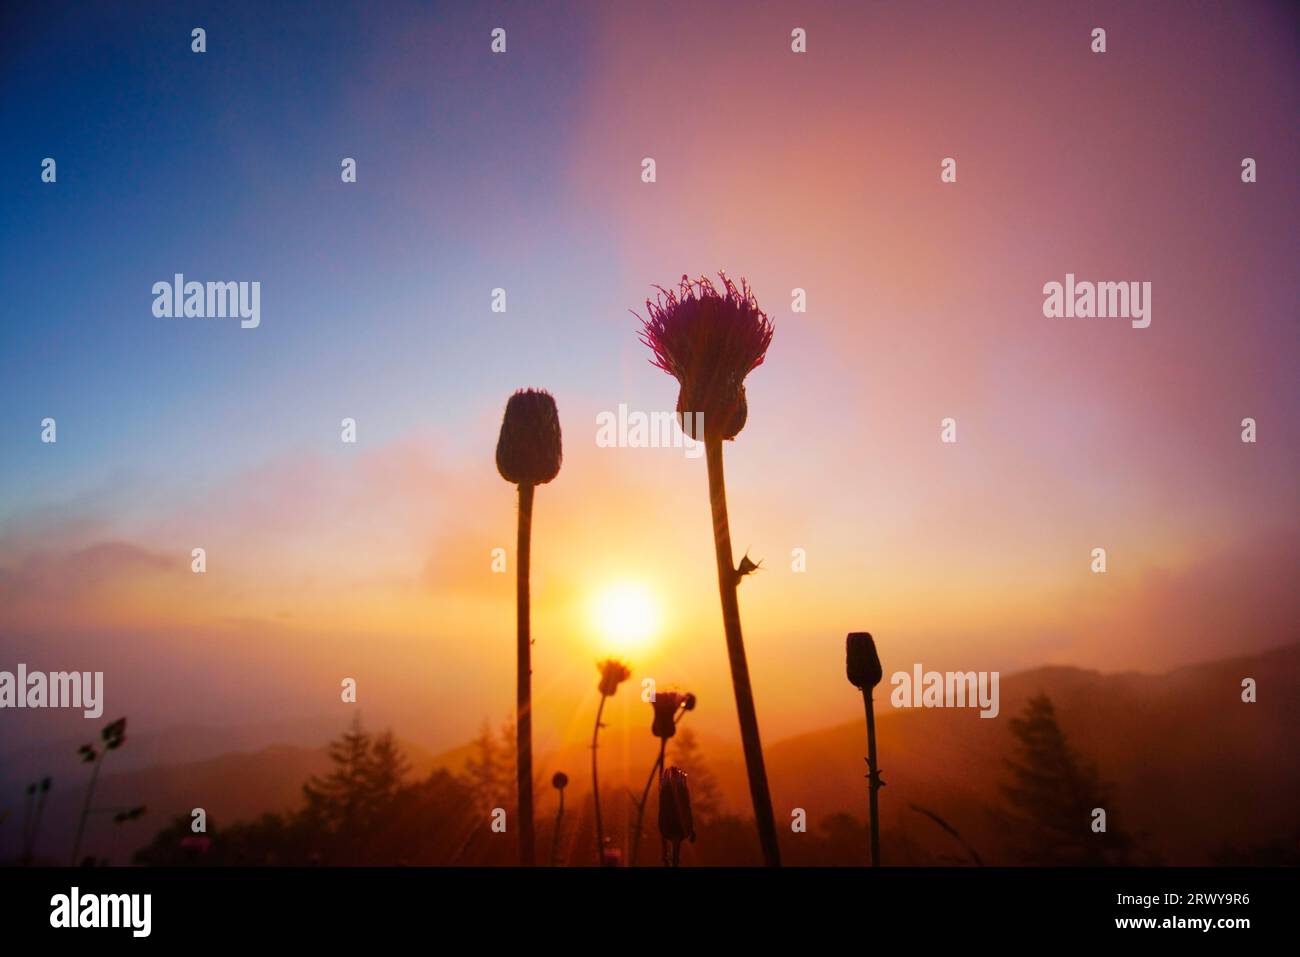 A close-up of a thistle, the morning sun and the mountains in the direction of Saku Stock Photo